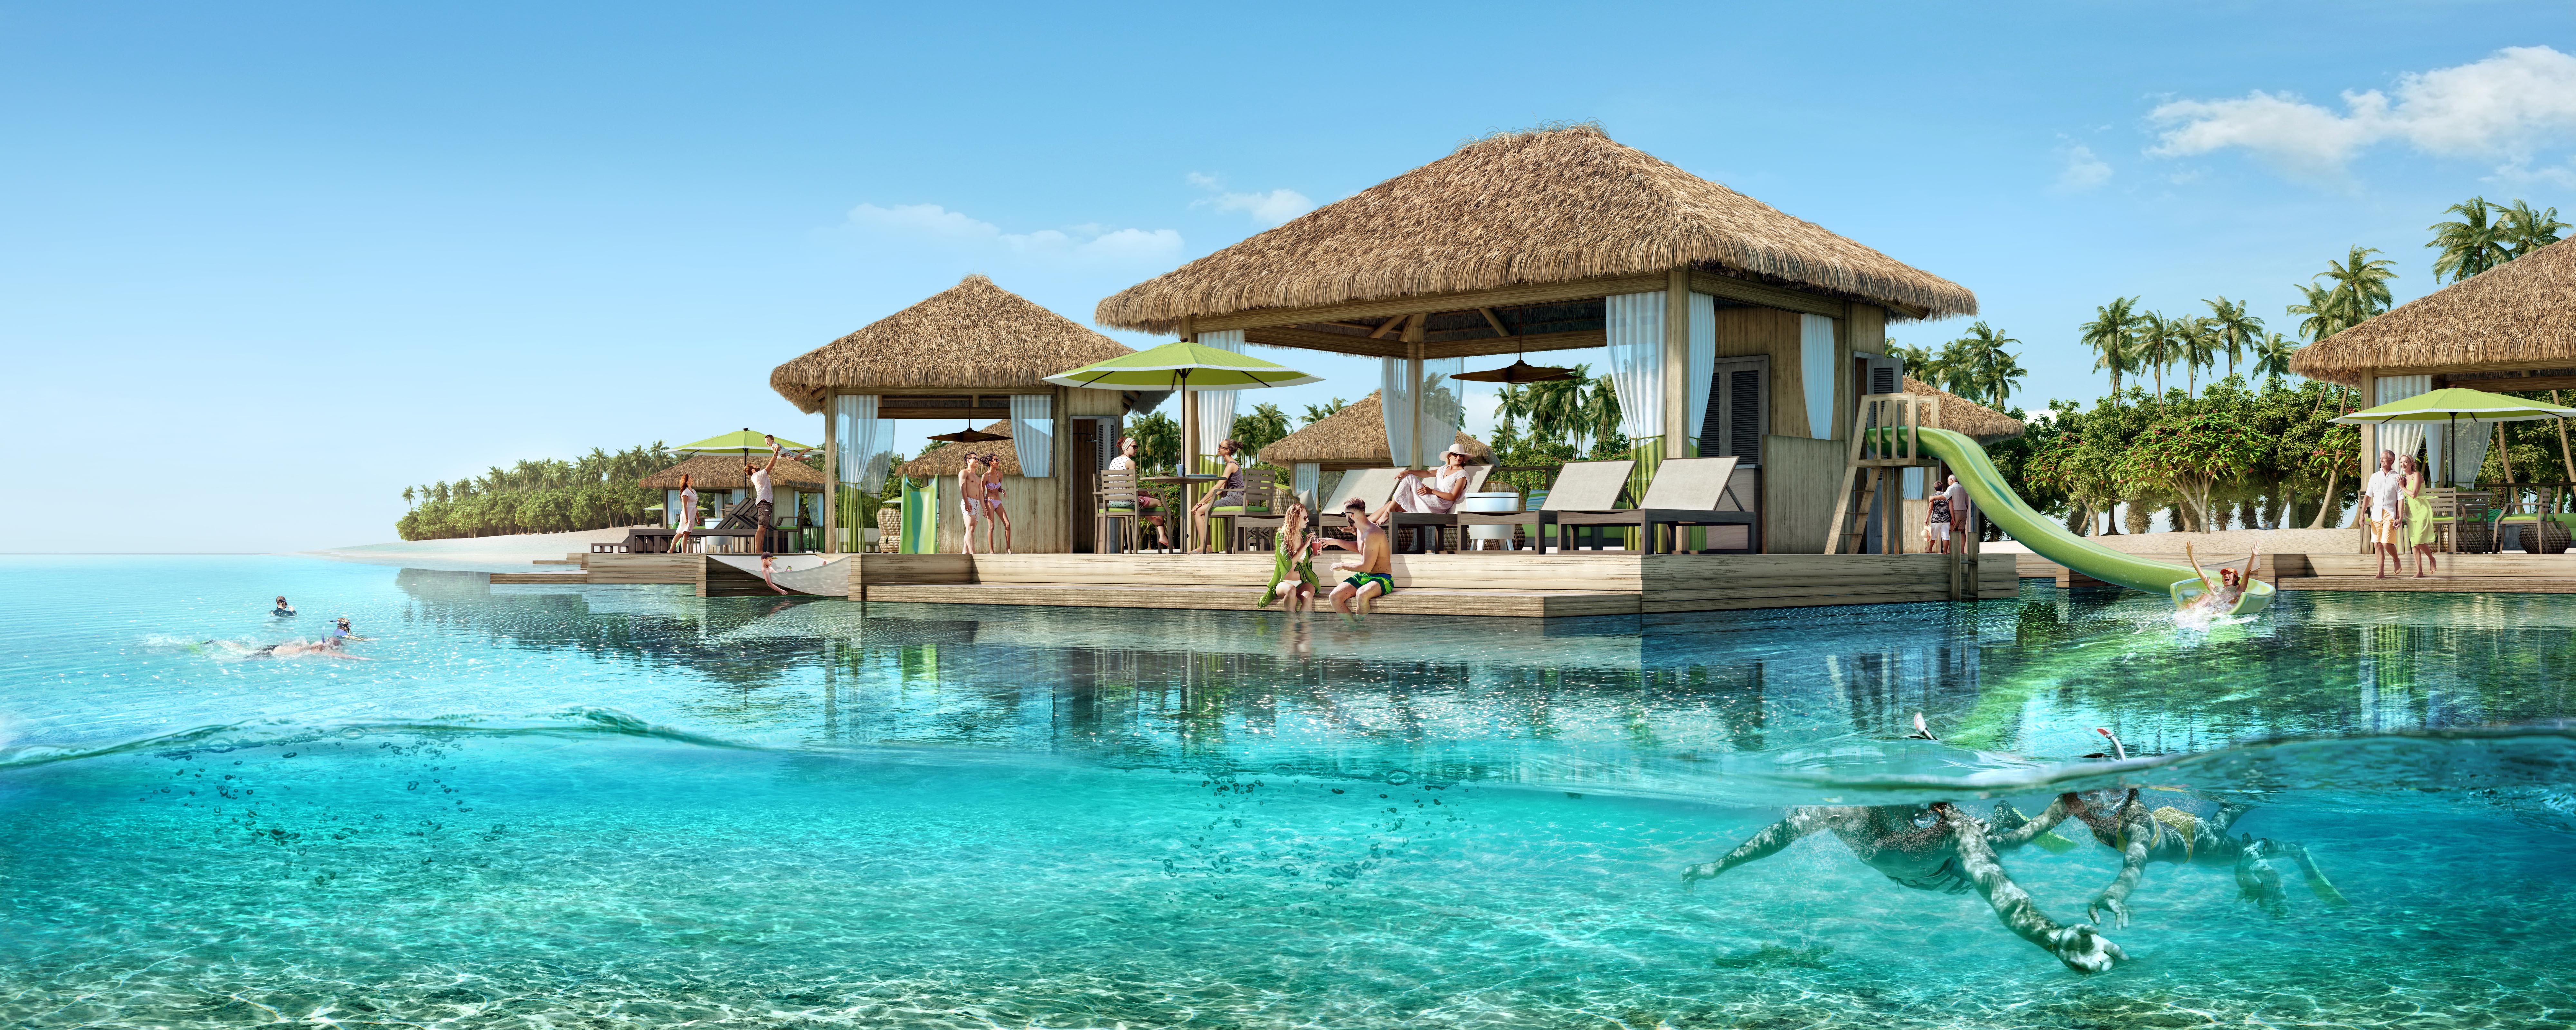 Royal Caribbean Wants How Much For An Overwater Cabana At Cococay